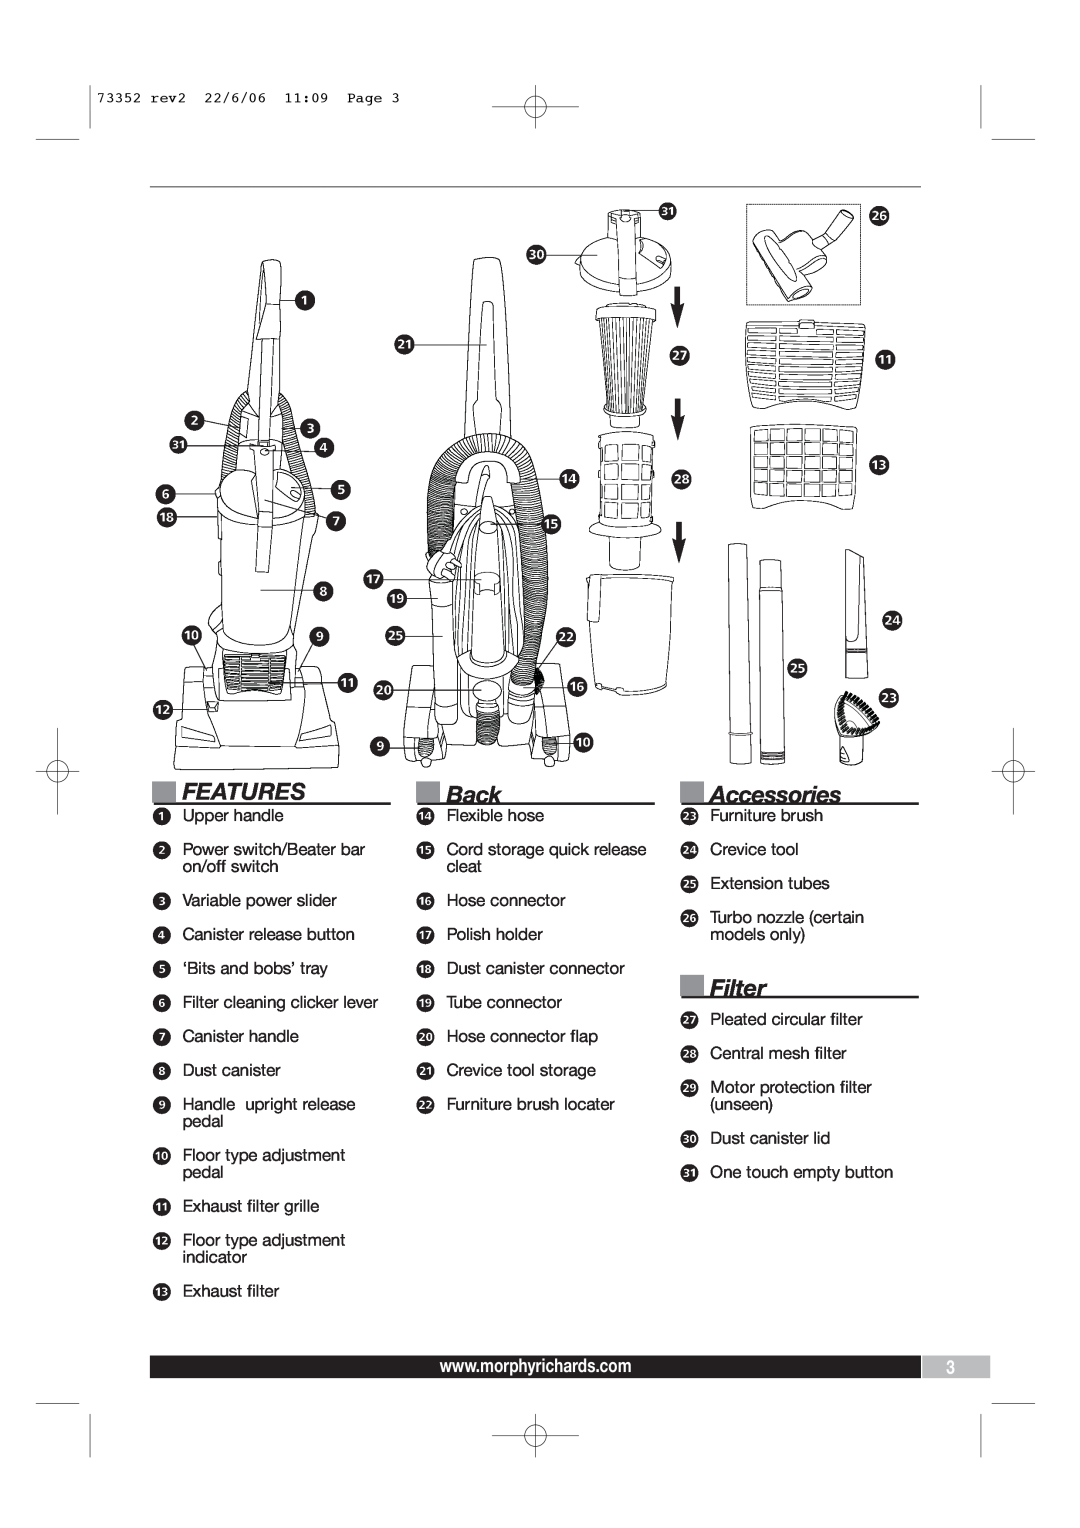 Morphy Richards PerformAir Upright Vacuum manual Features, Back, Accessories, Filter 